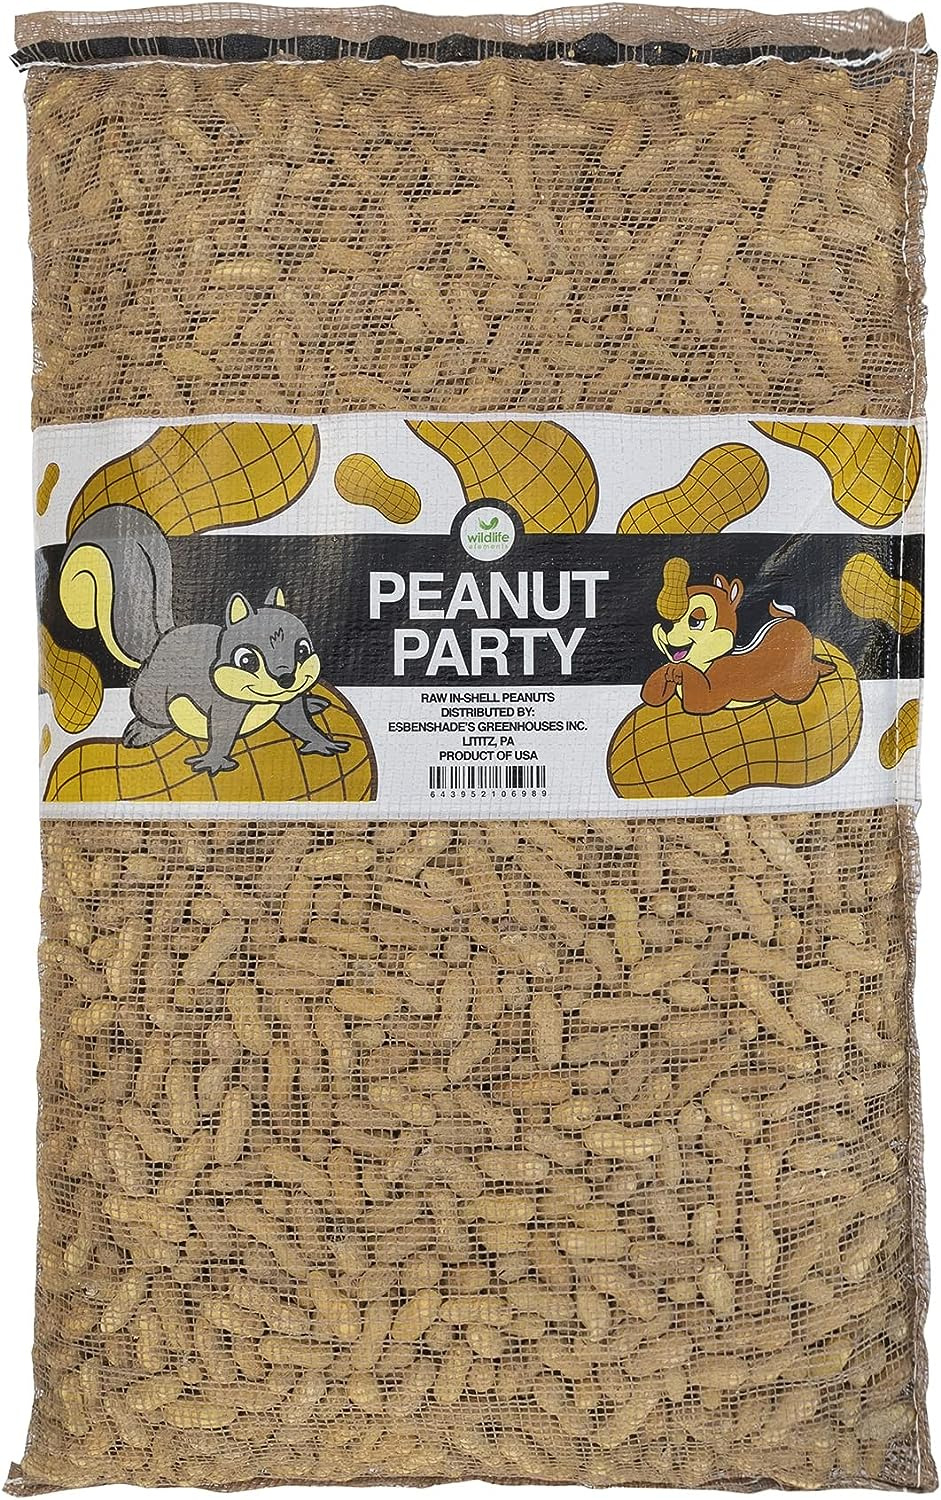 Peanut Party In-Shell Peanuts for Birds, Squirrels, Wild Animal Food, 25 Pound B